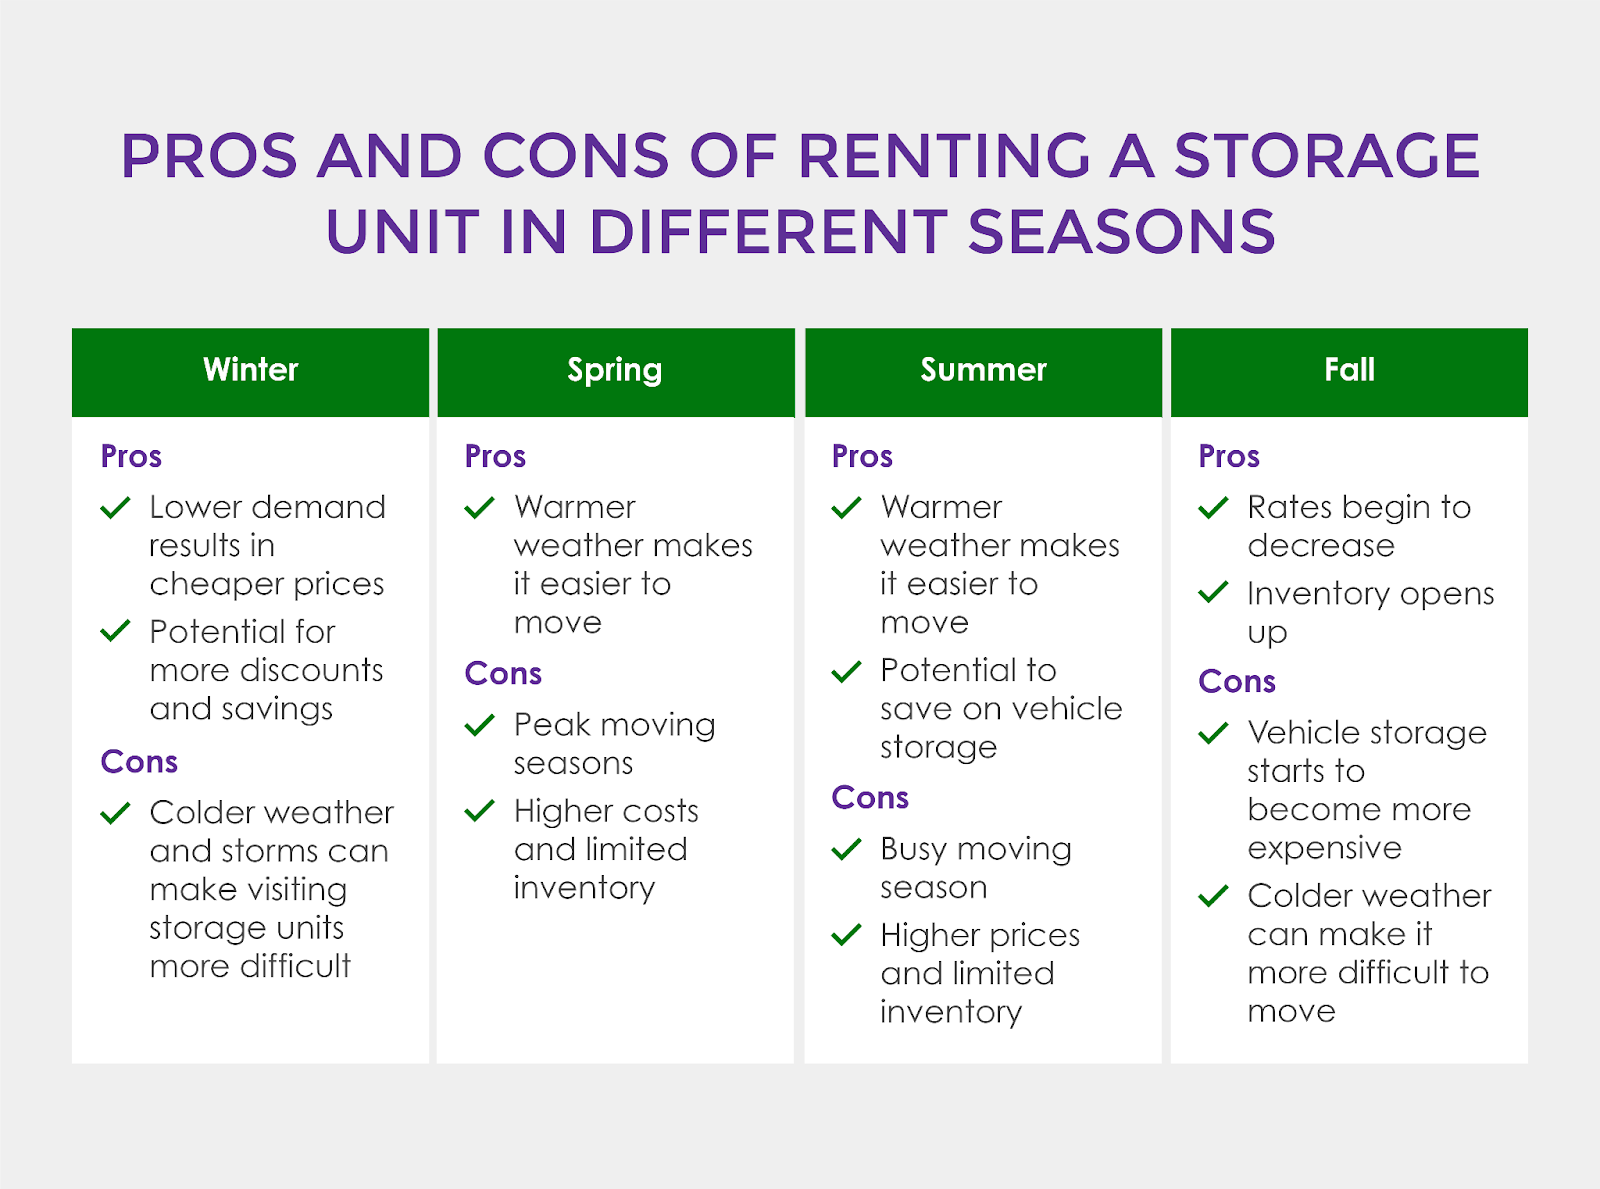 Pros and cons of renting a storage unit in different seasons